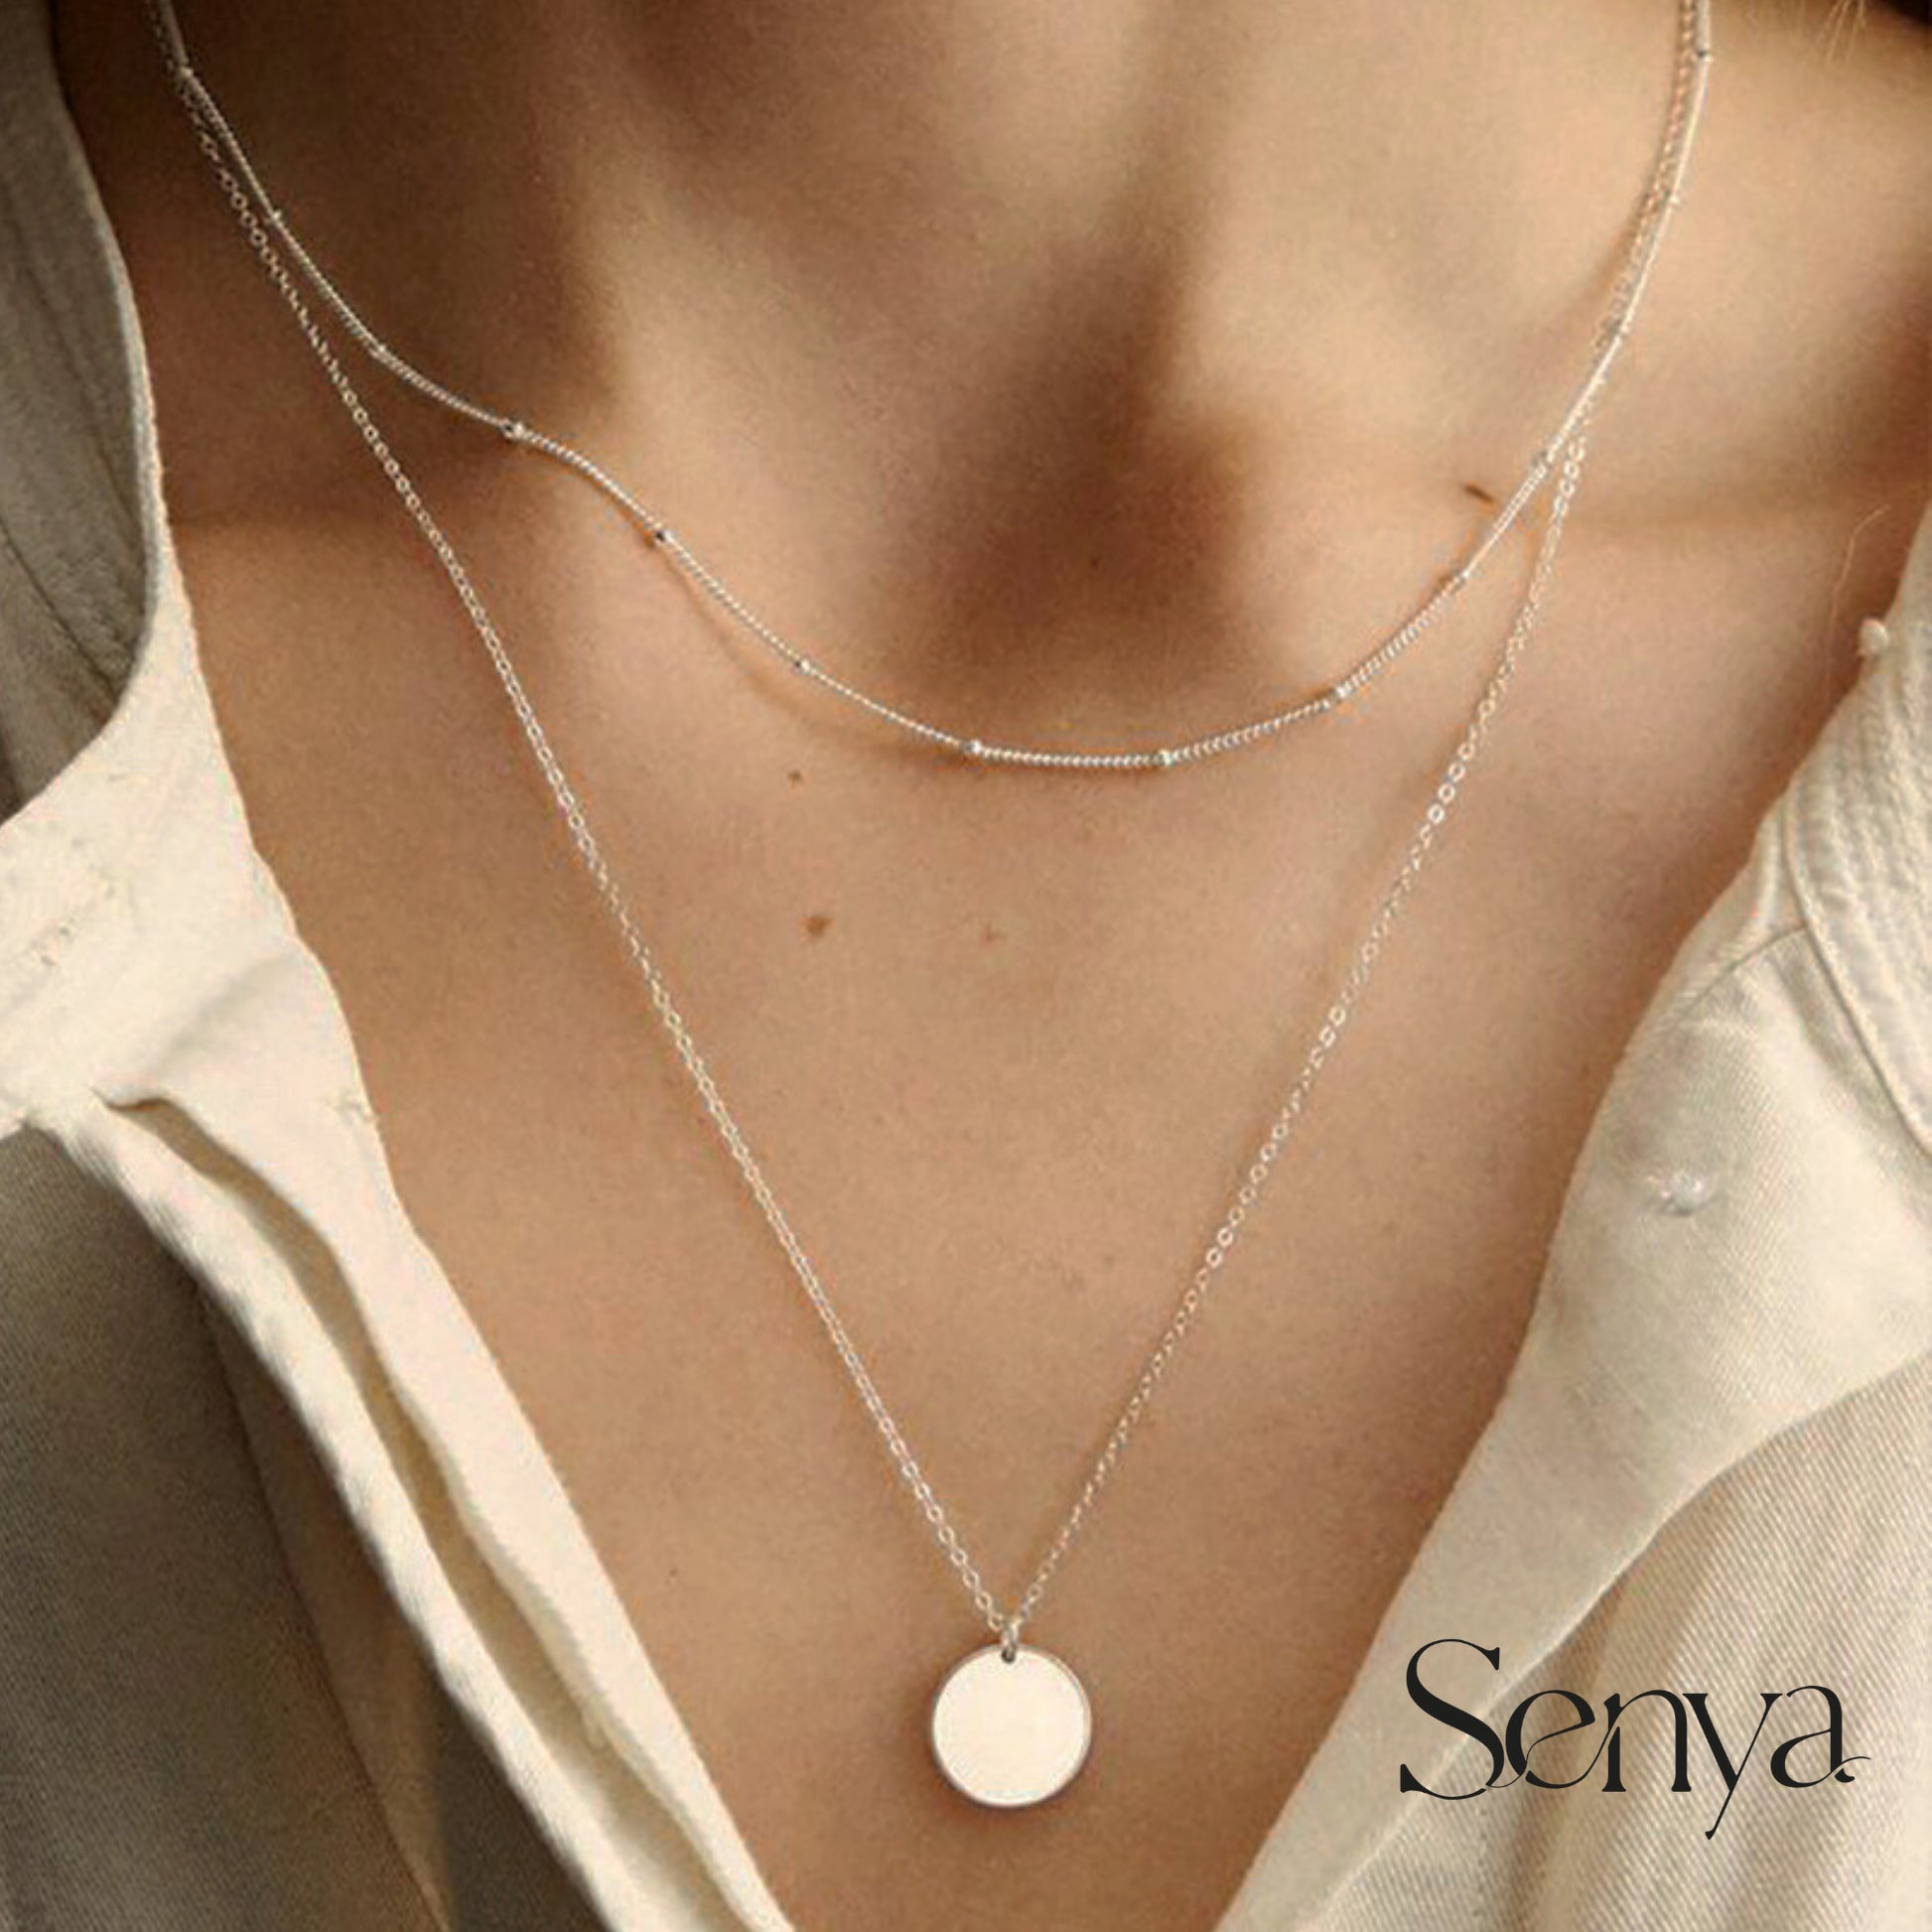 how much does a circle necklace layering set cost, are circle necklace layering sets in style, what to wear with a circle necklace layering set, unique circle necklace layering set designs,